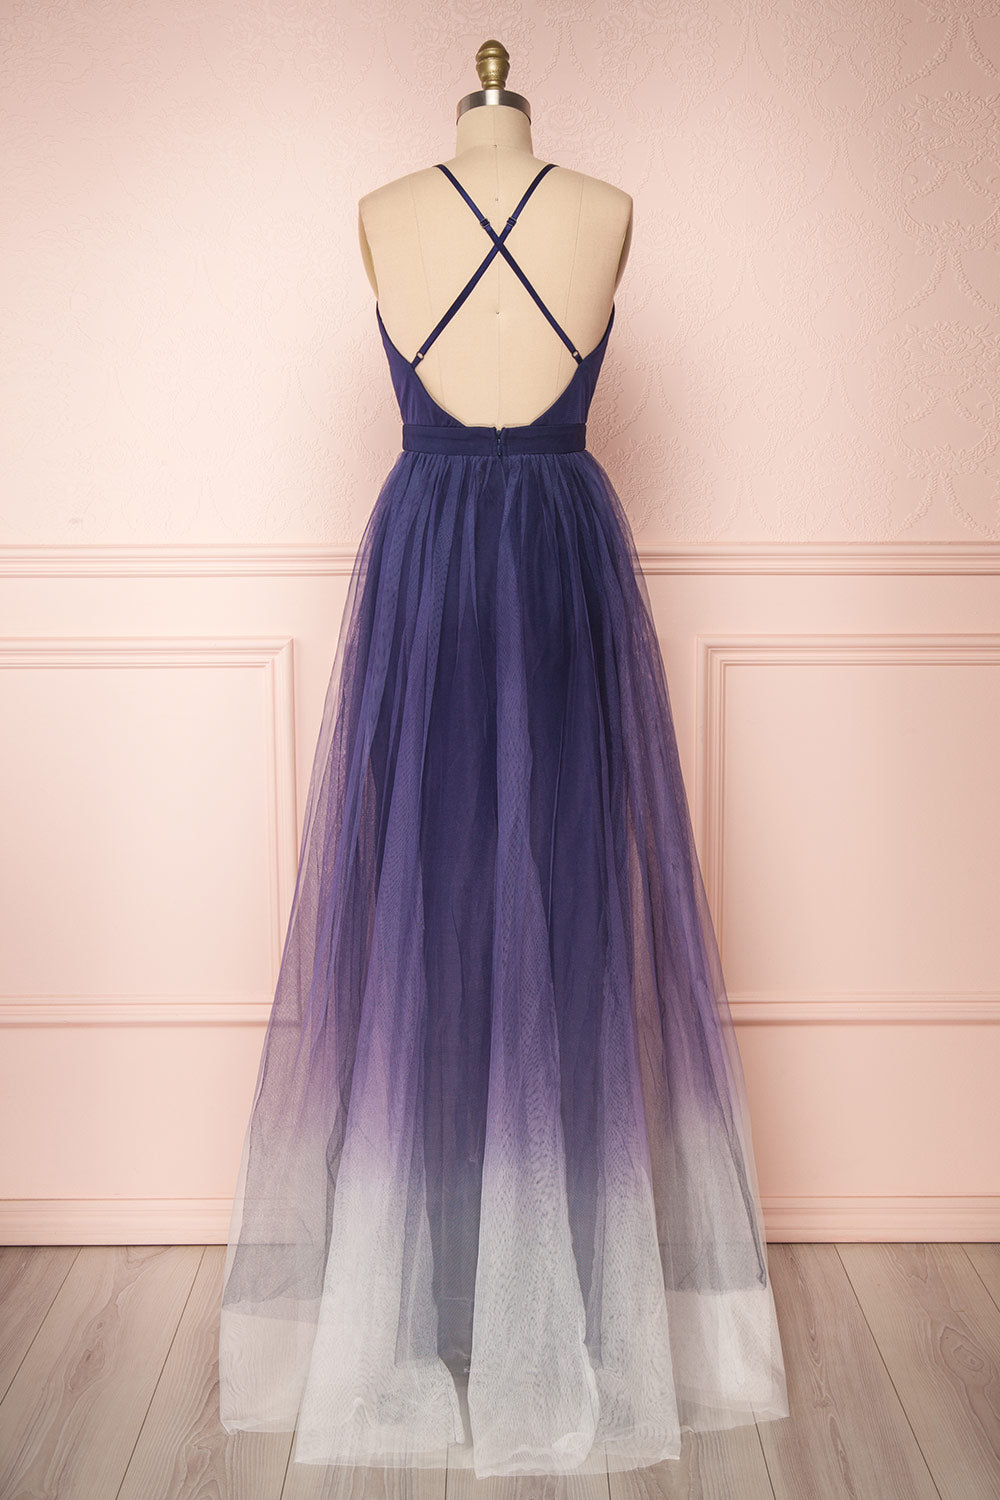 Docina Ocean Navy Blue & White Tulle Maxi Prom Dress | BACK VIEW | Boutique 1861